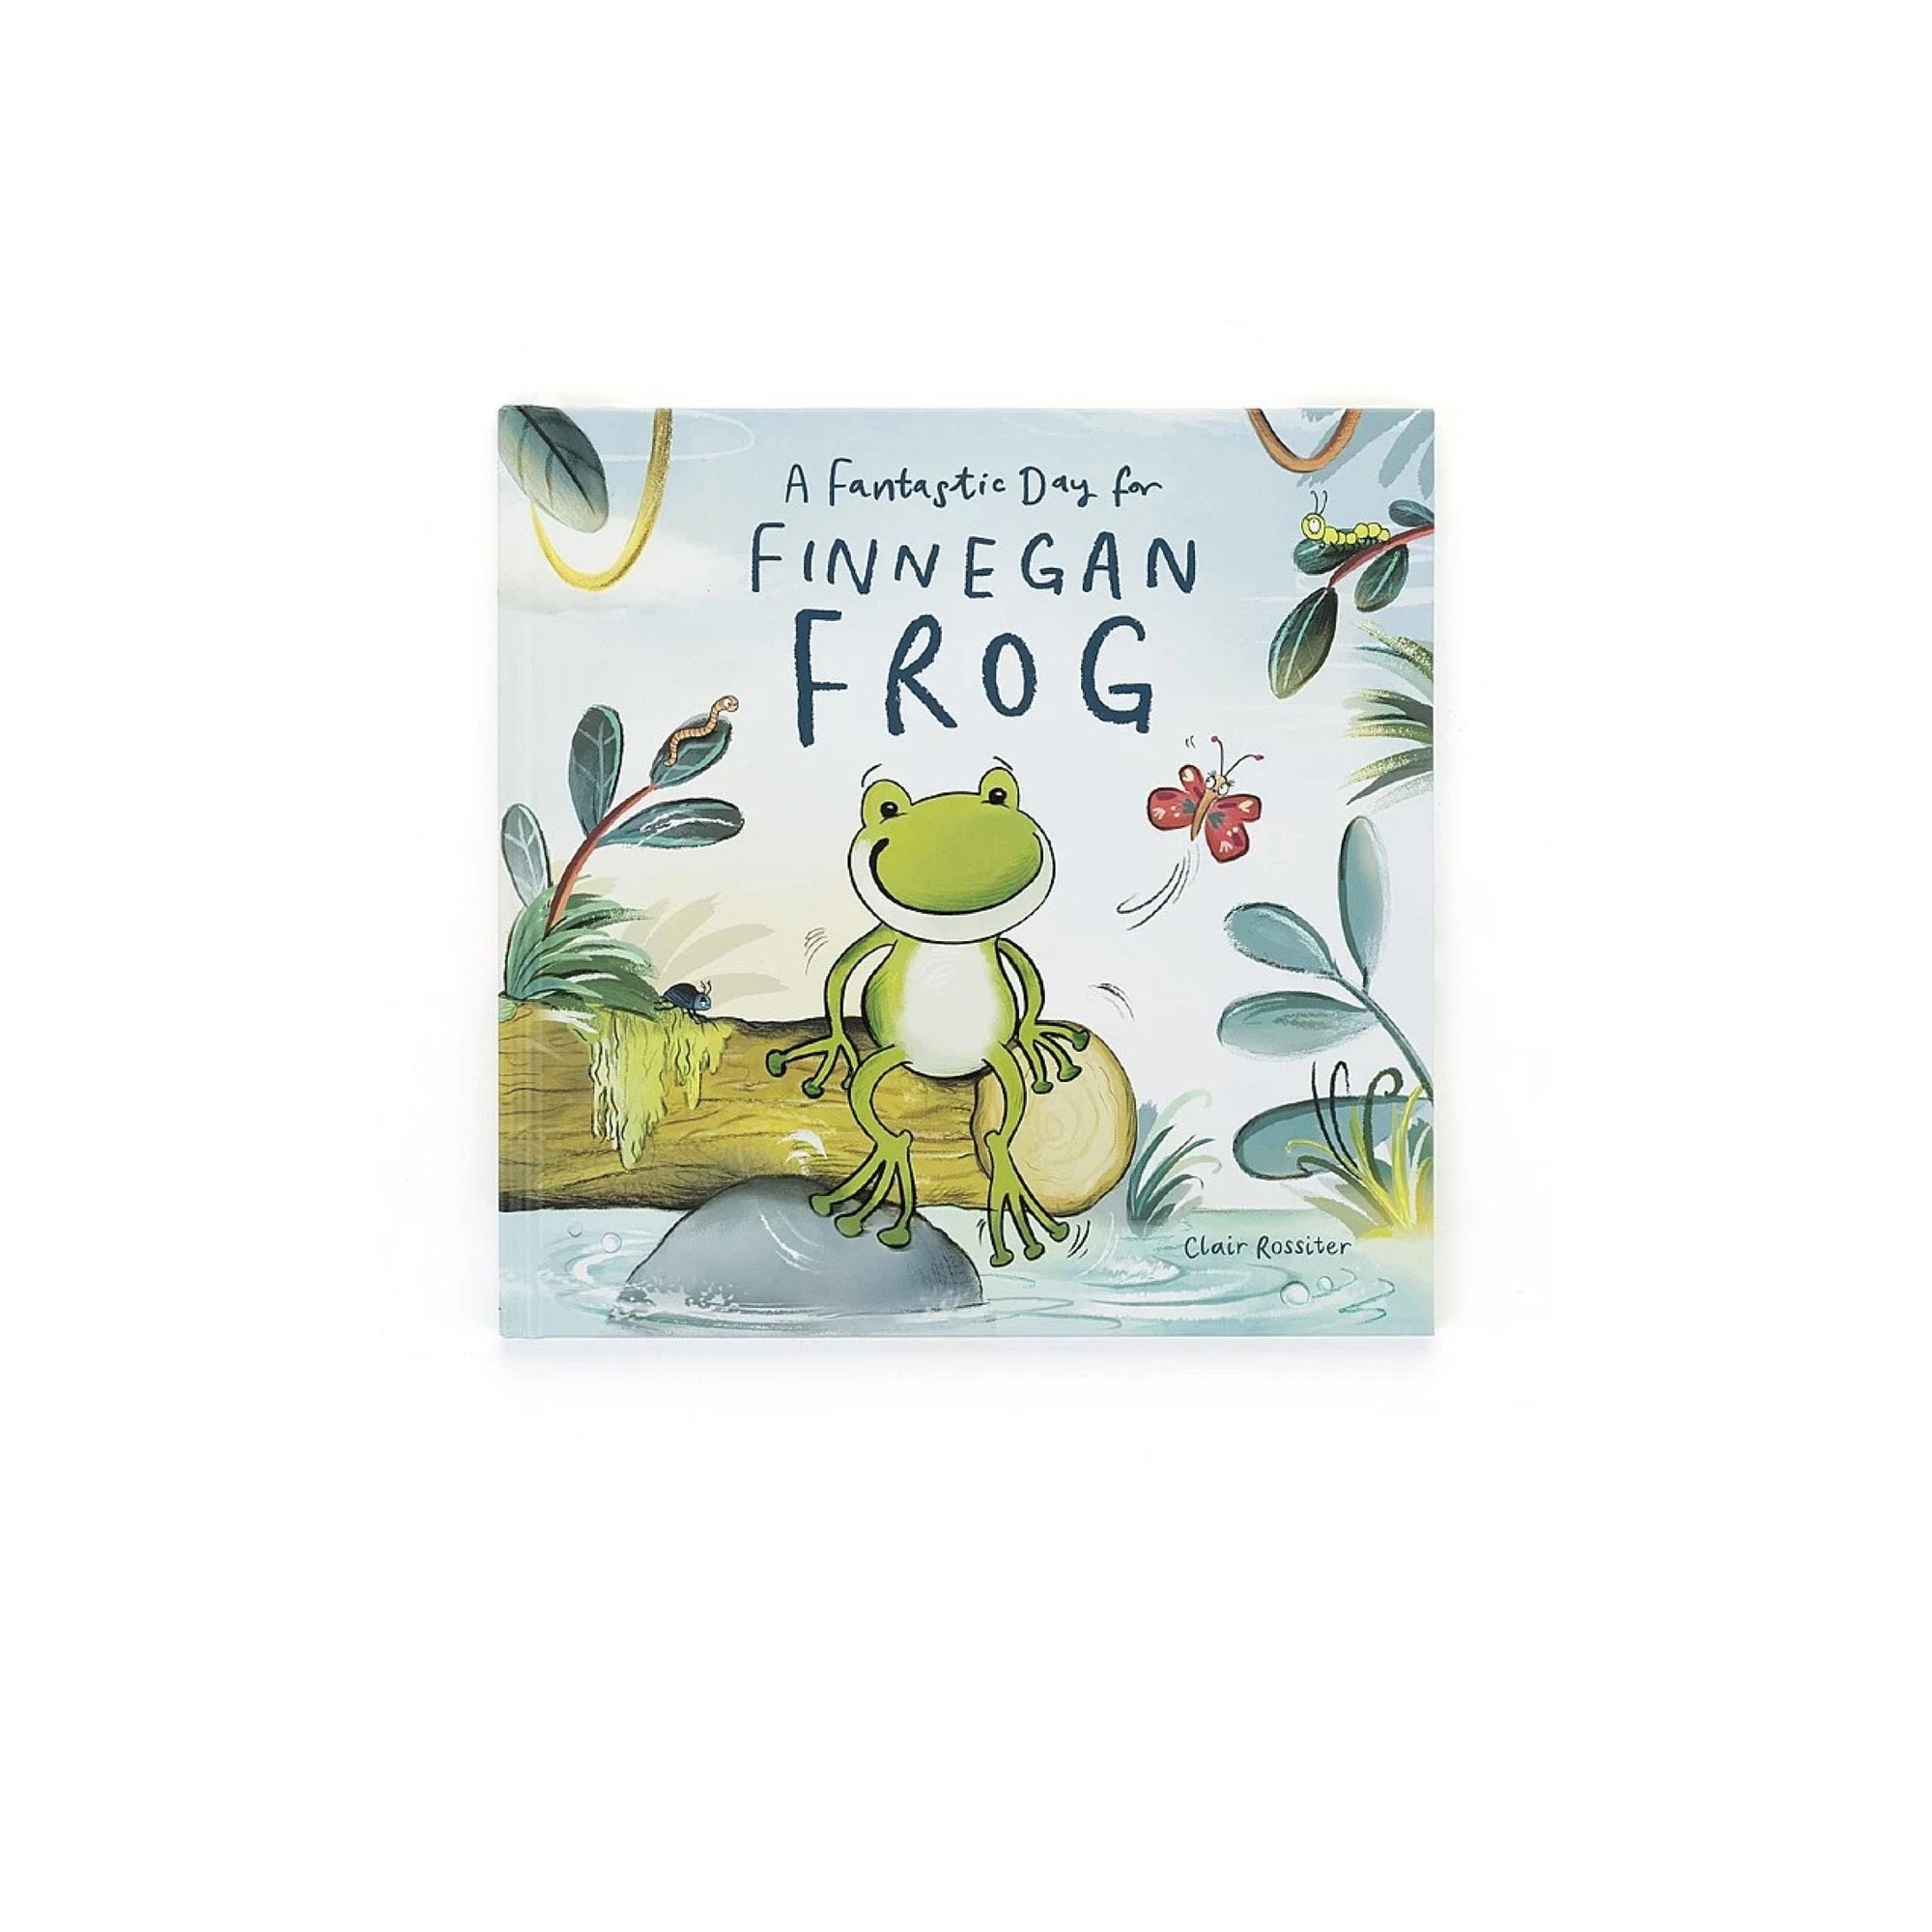 A Fantastic Day For Finnegan The Frog Book